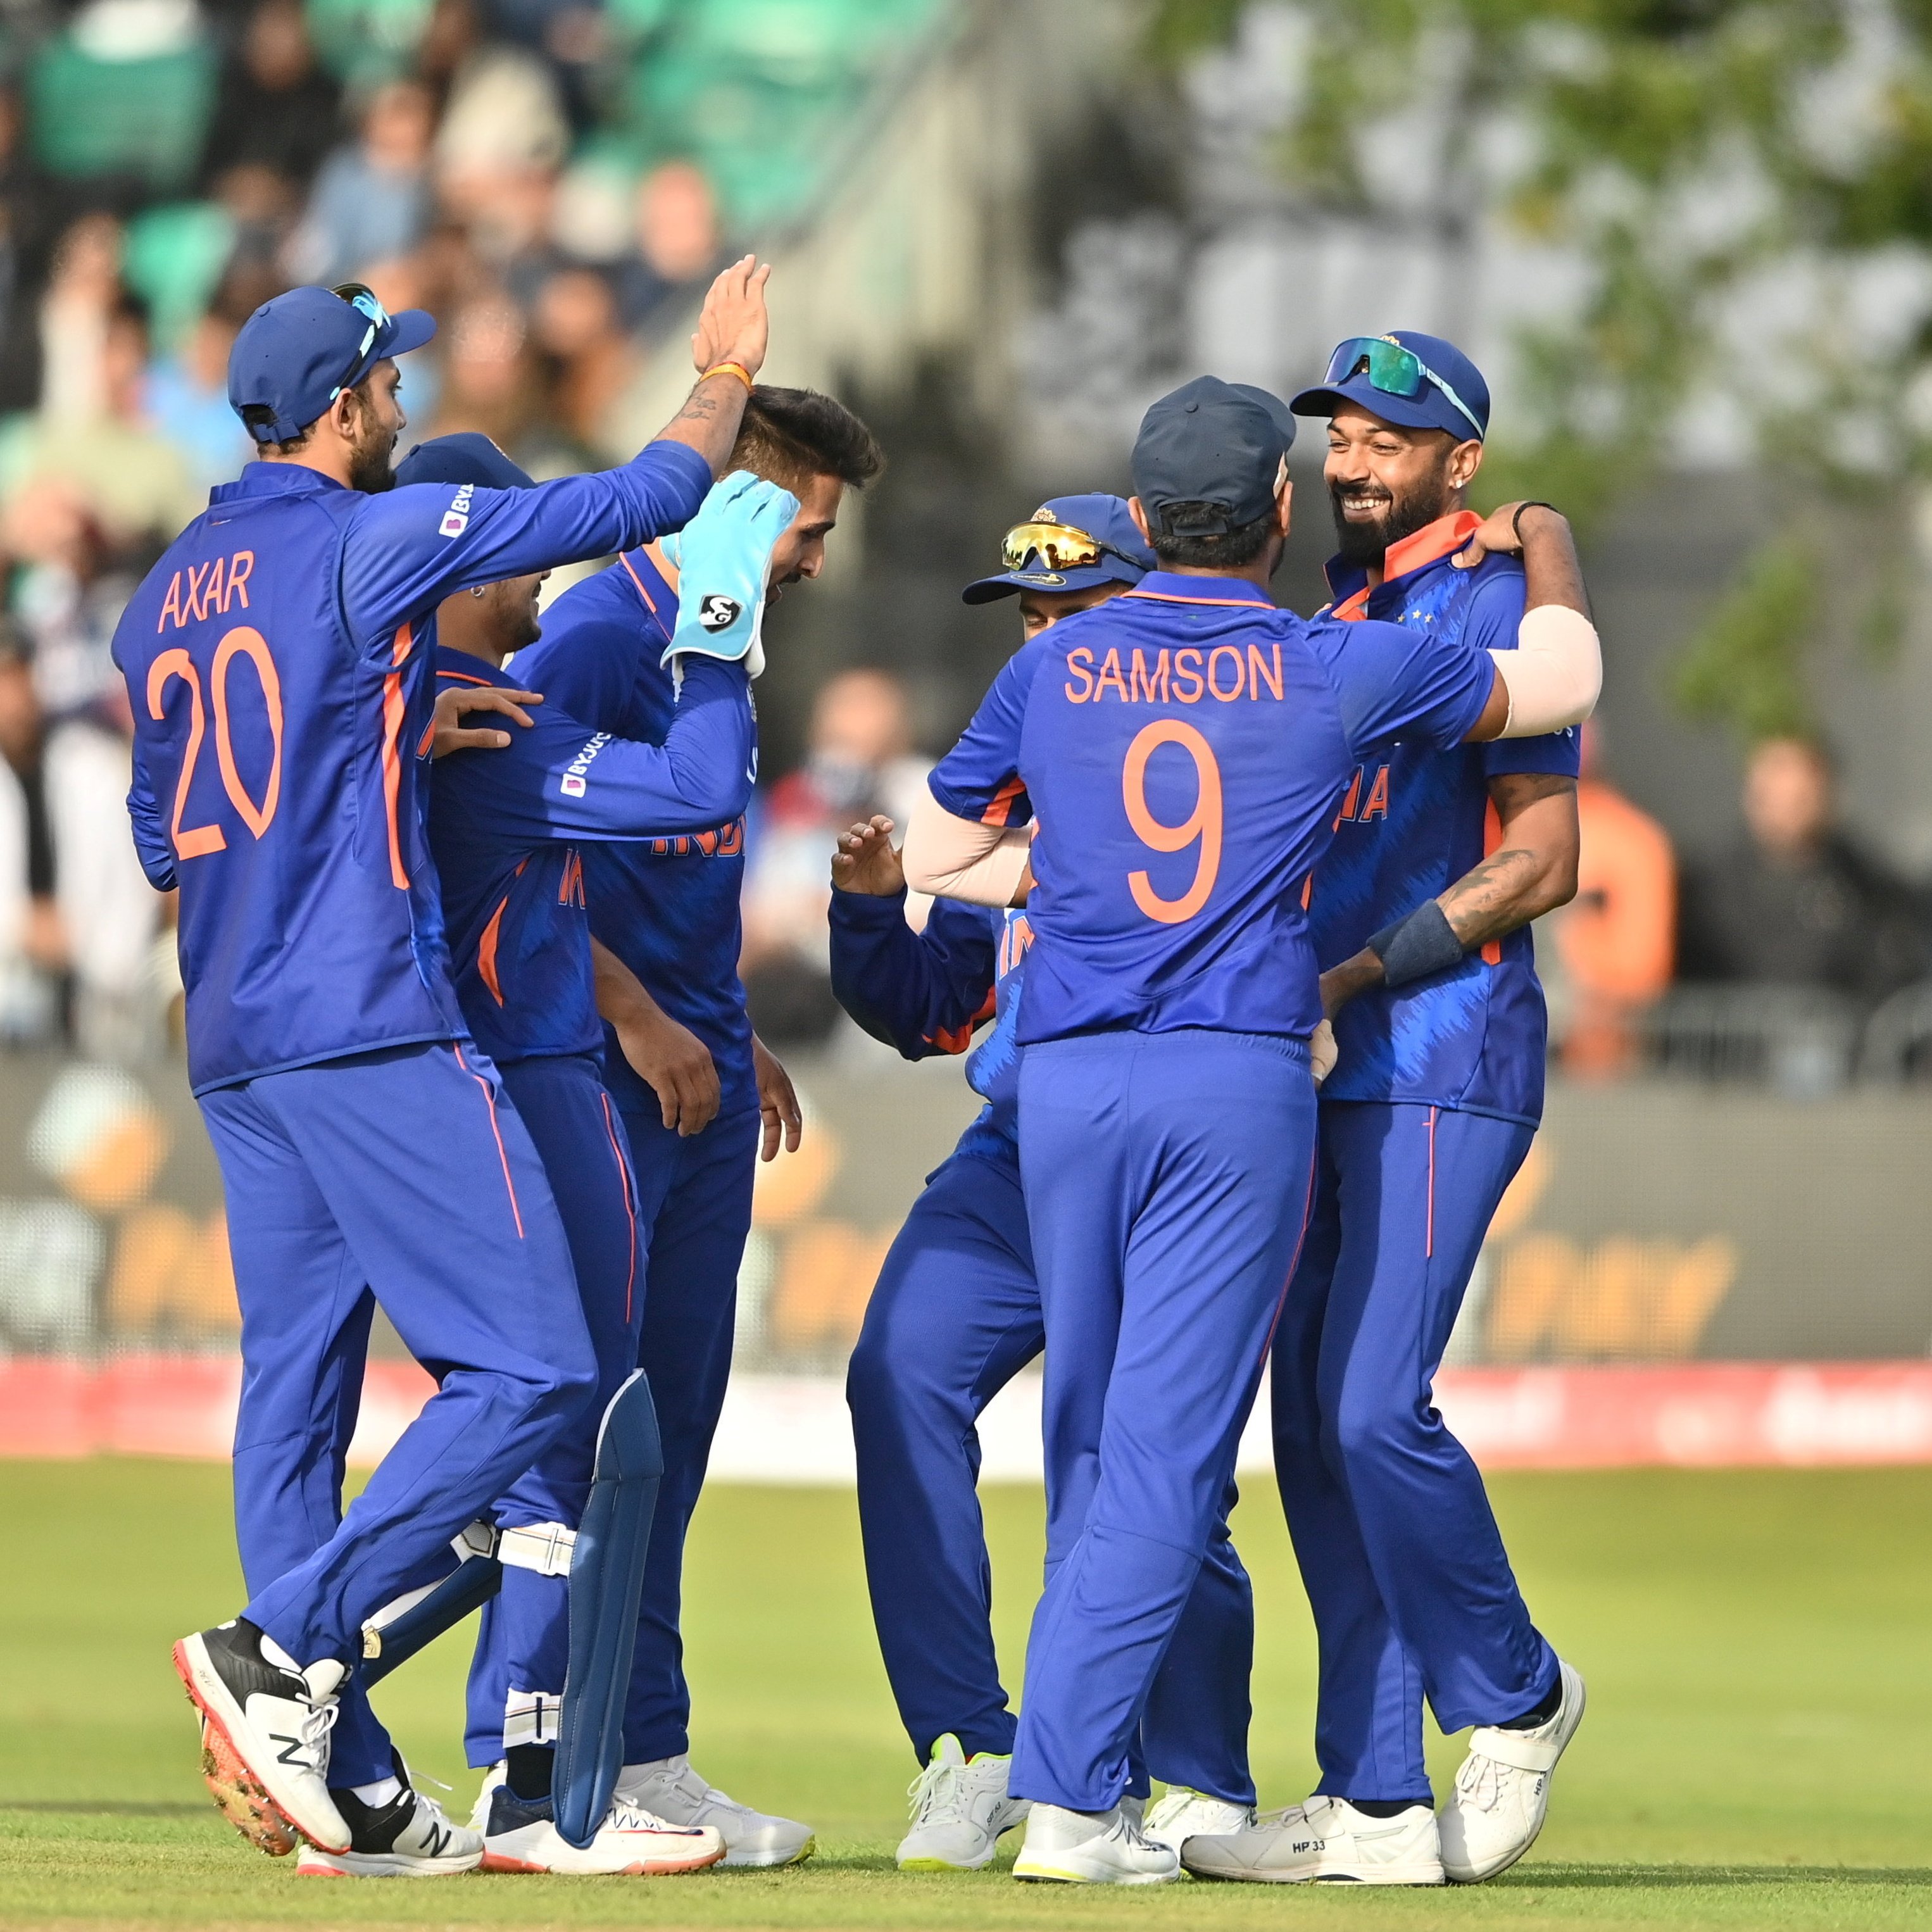 IND vs IRE LIVE: Umran malik defends 17 off last over as India SURVIVE Irish scare to clinch series 2-0: Check 2nd T20 Highlights